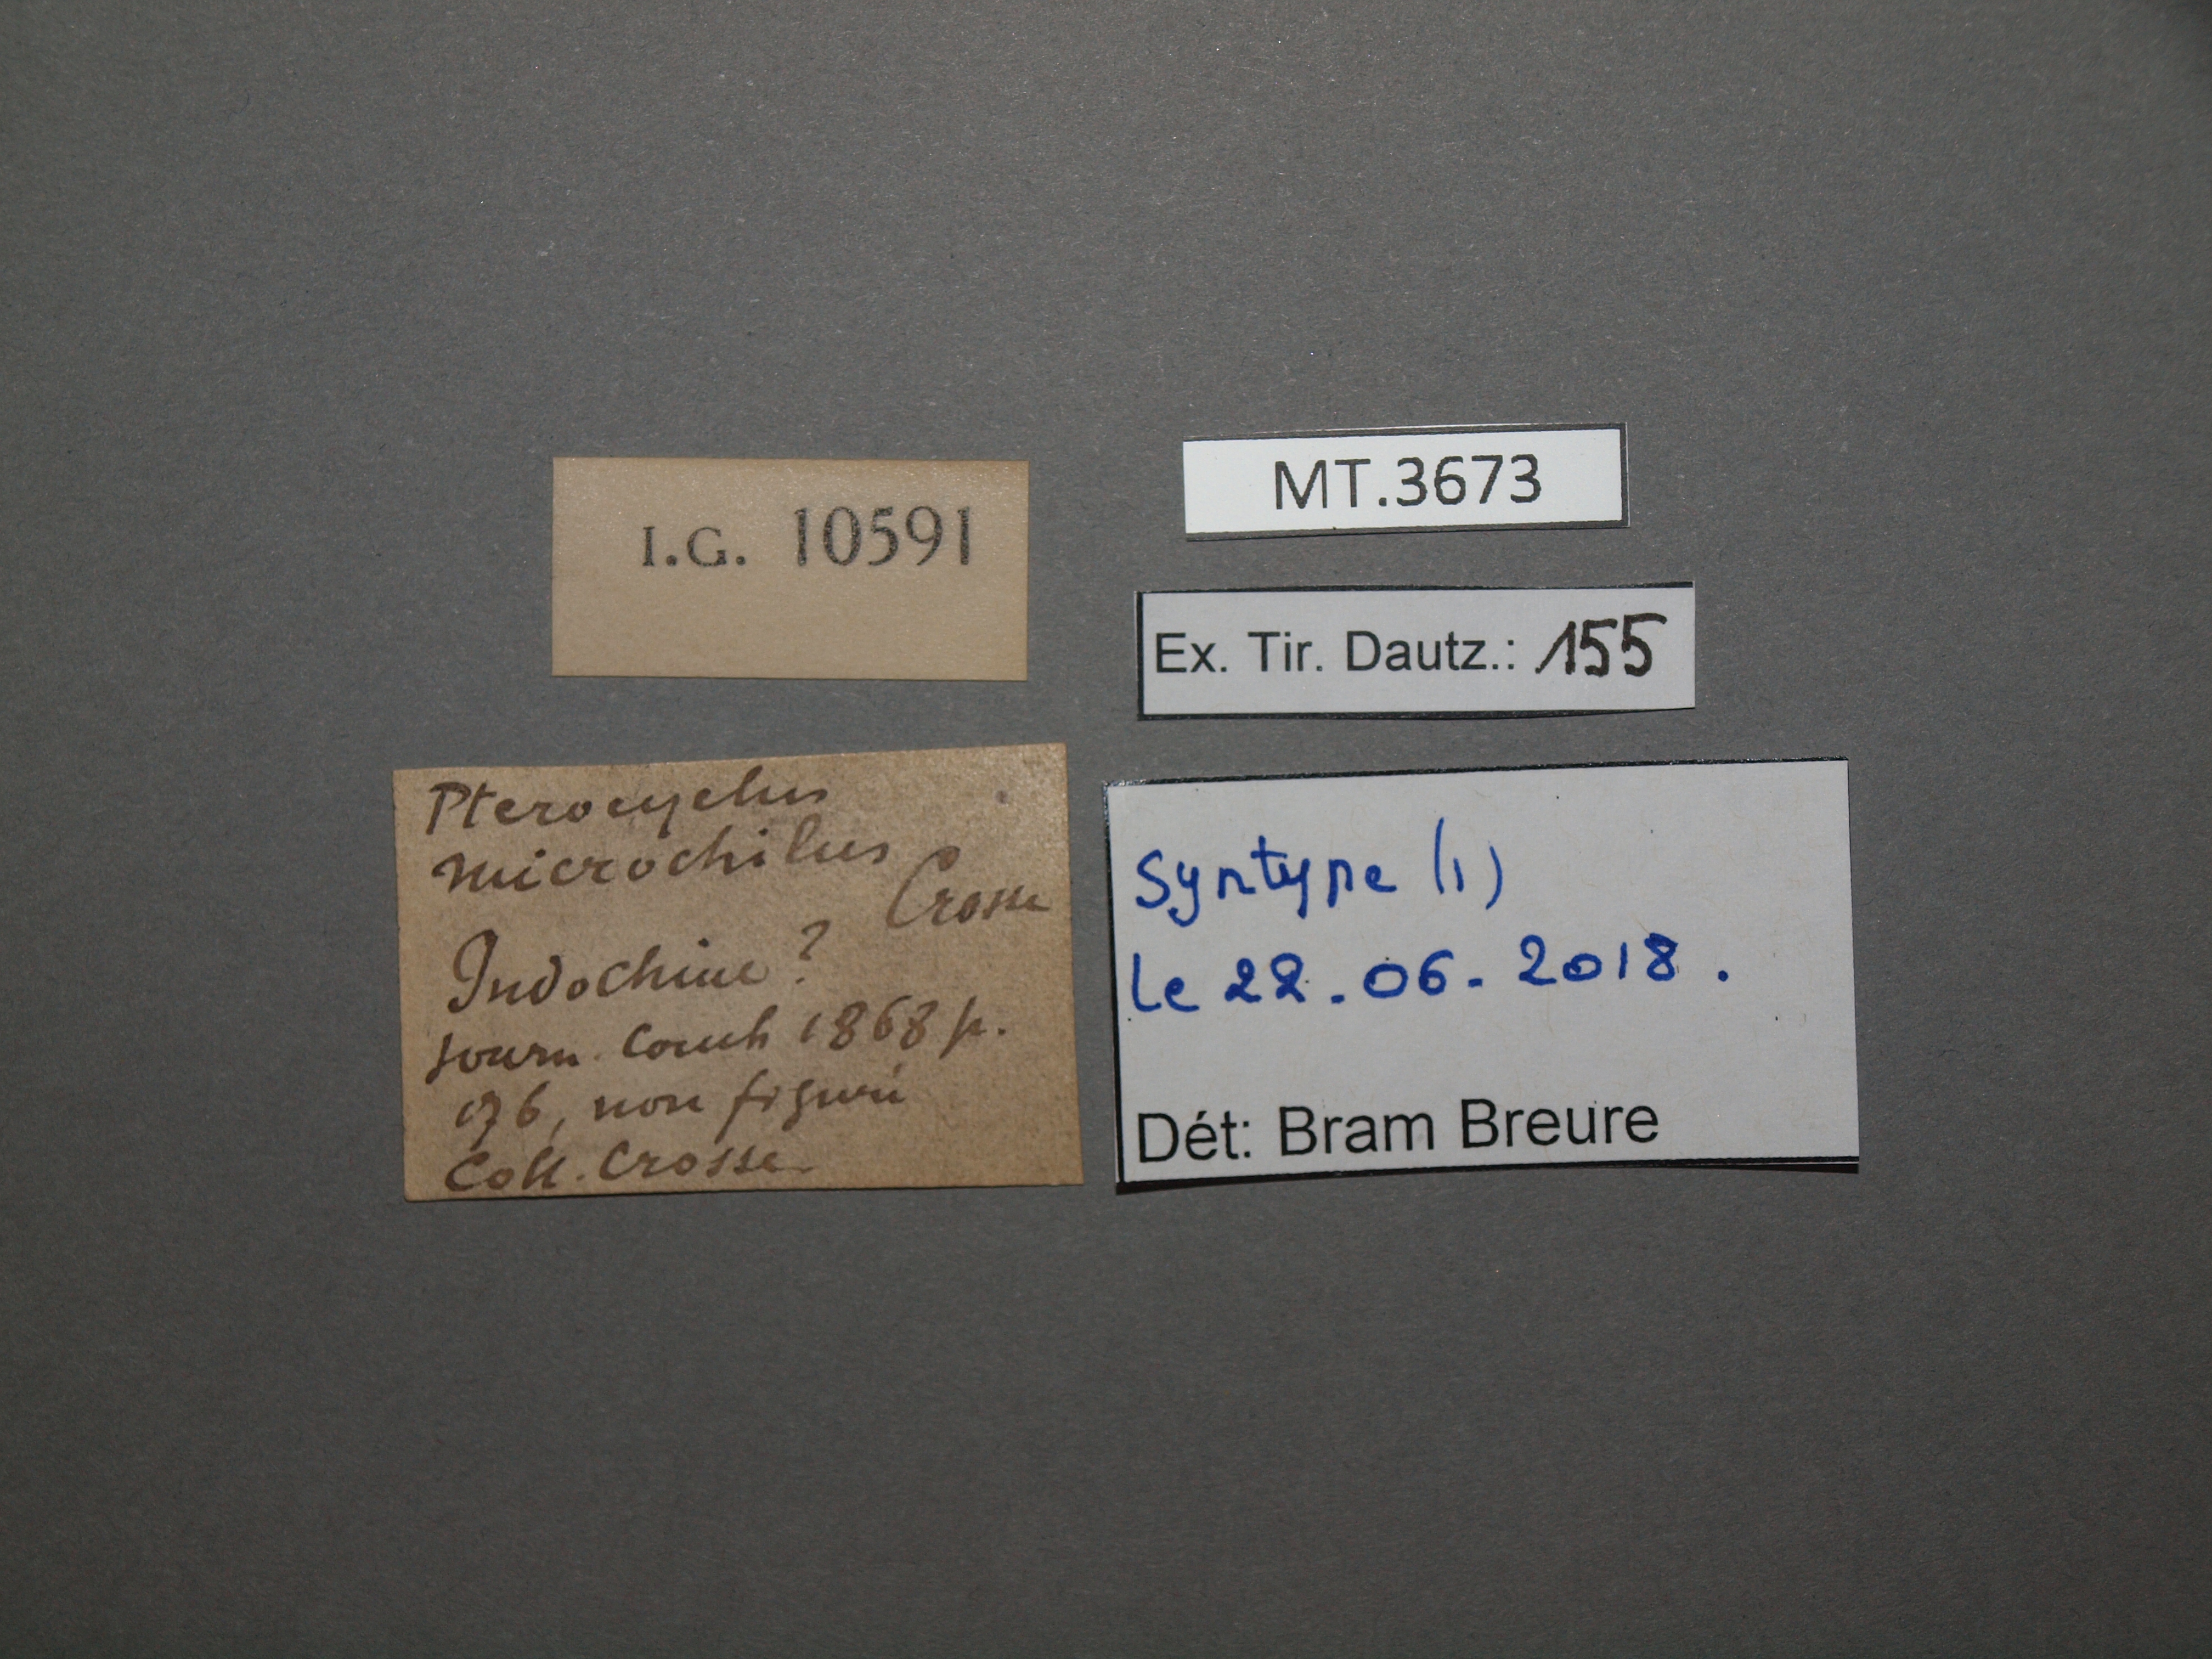 BE-RBINS-INV SYNTYPE MT.3673 Pterocyclus microchilus LABELS.jpg